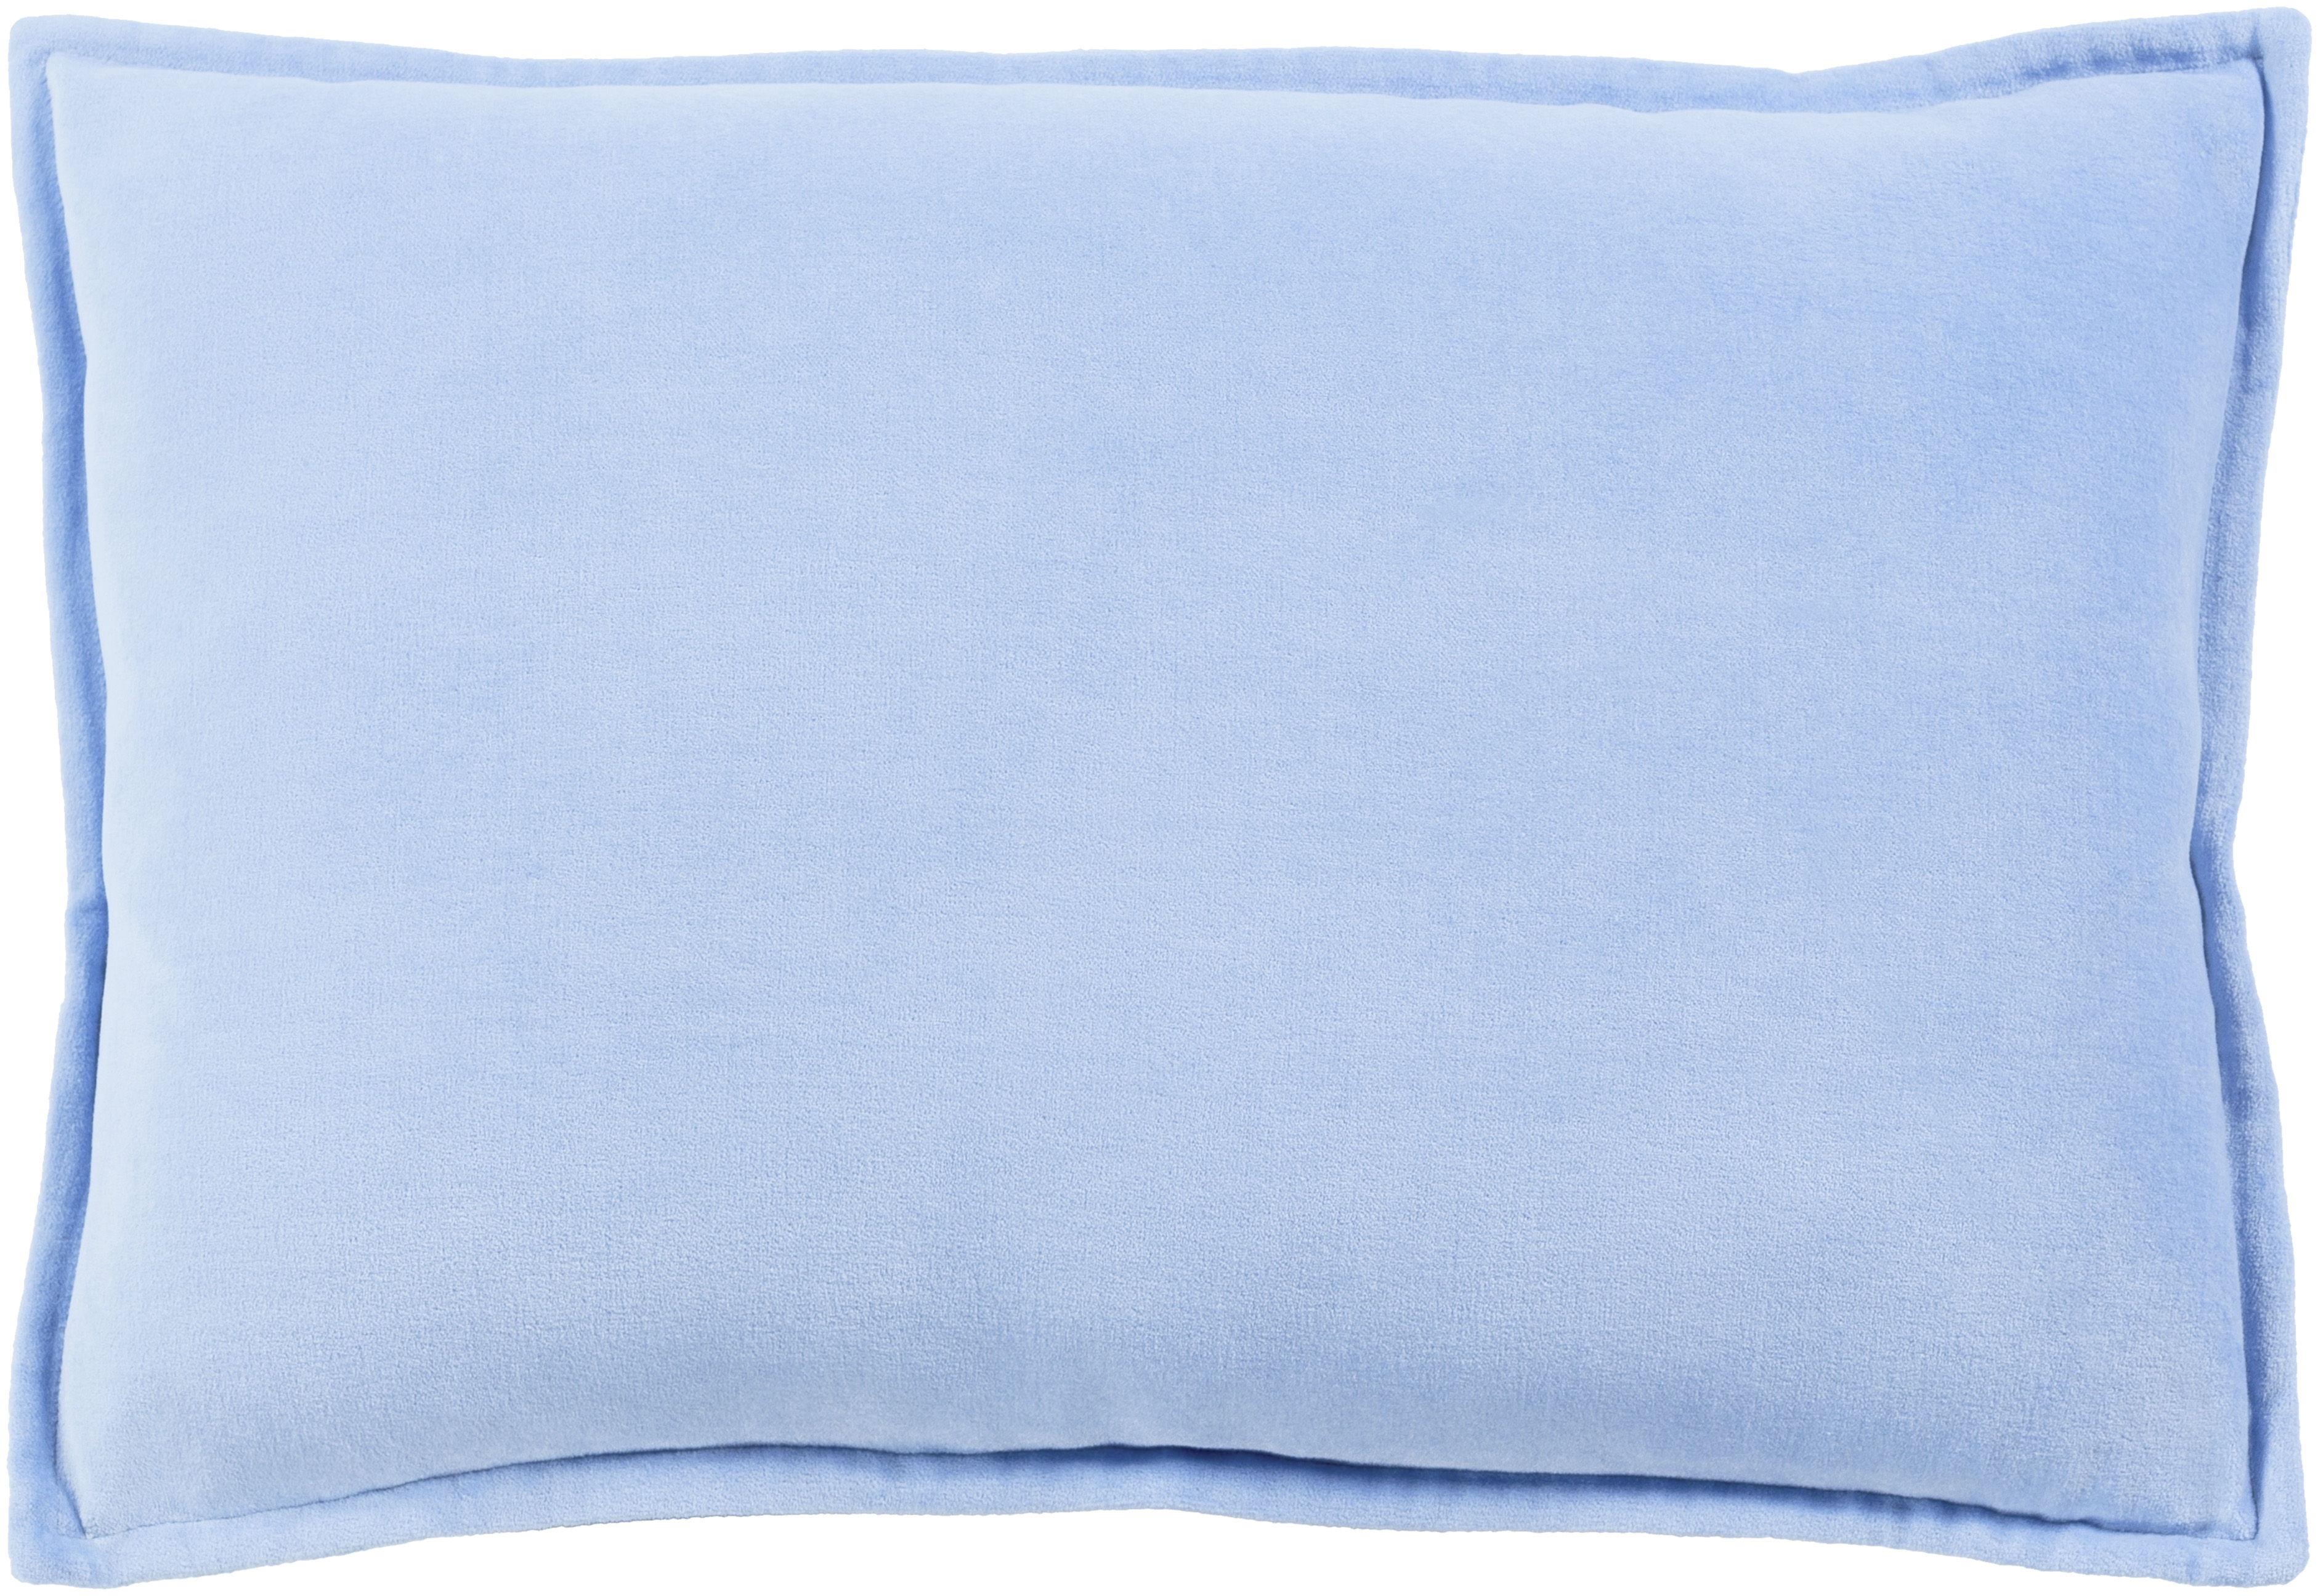 Cotton Velvet Throw Pillow, 18" x 18", with poly insert - Image 1